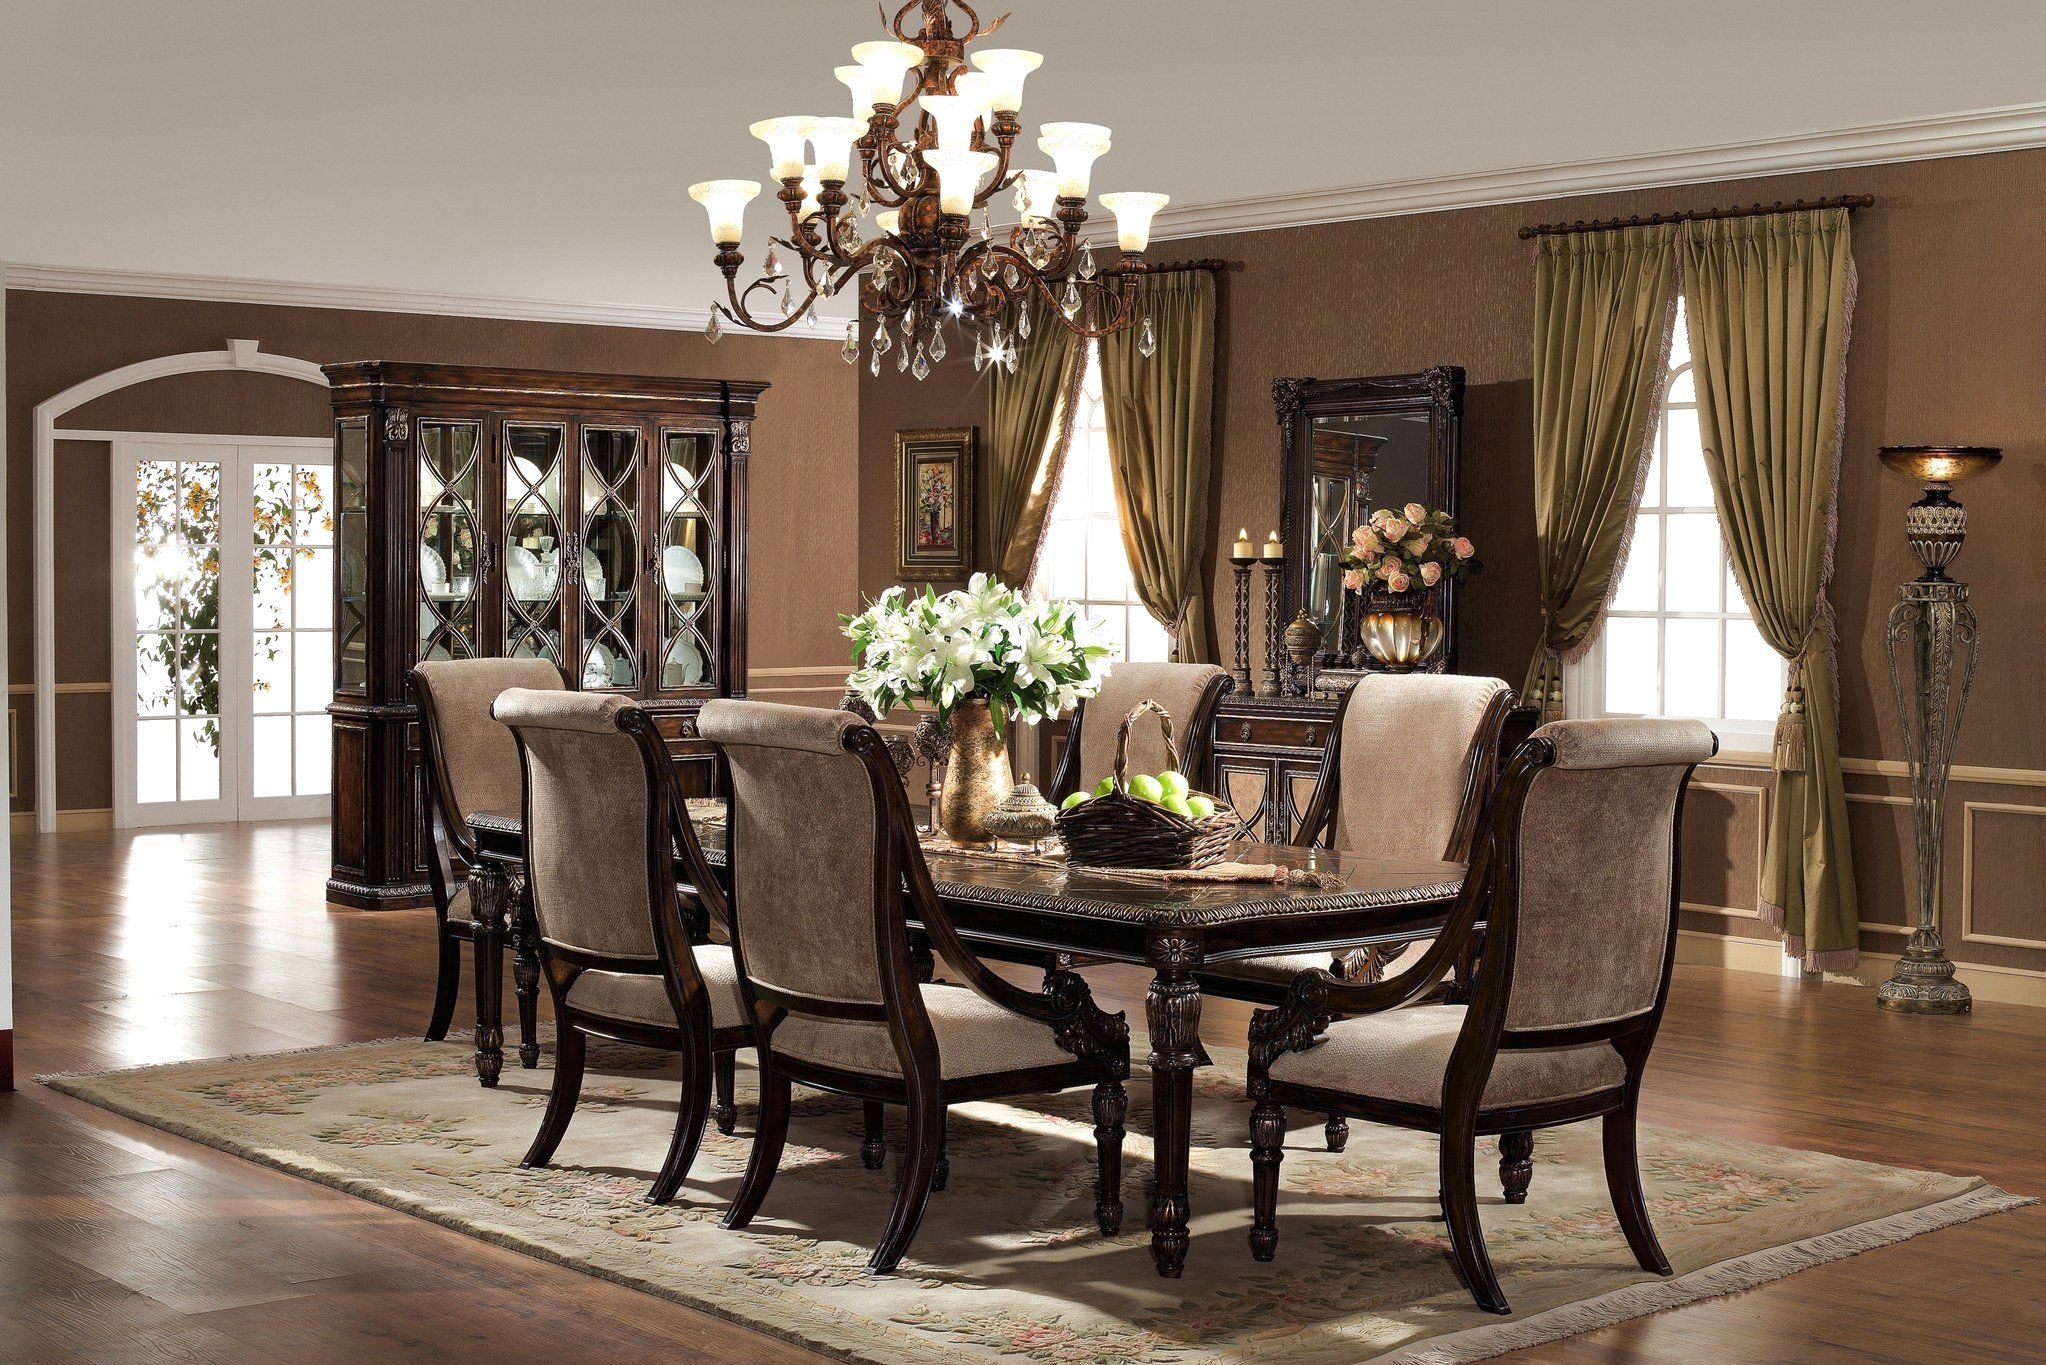 Formal Dining Room Table Sets, Formal Dining Room Table And Chairs